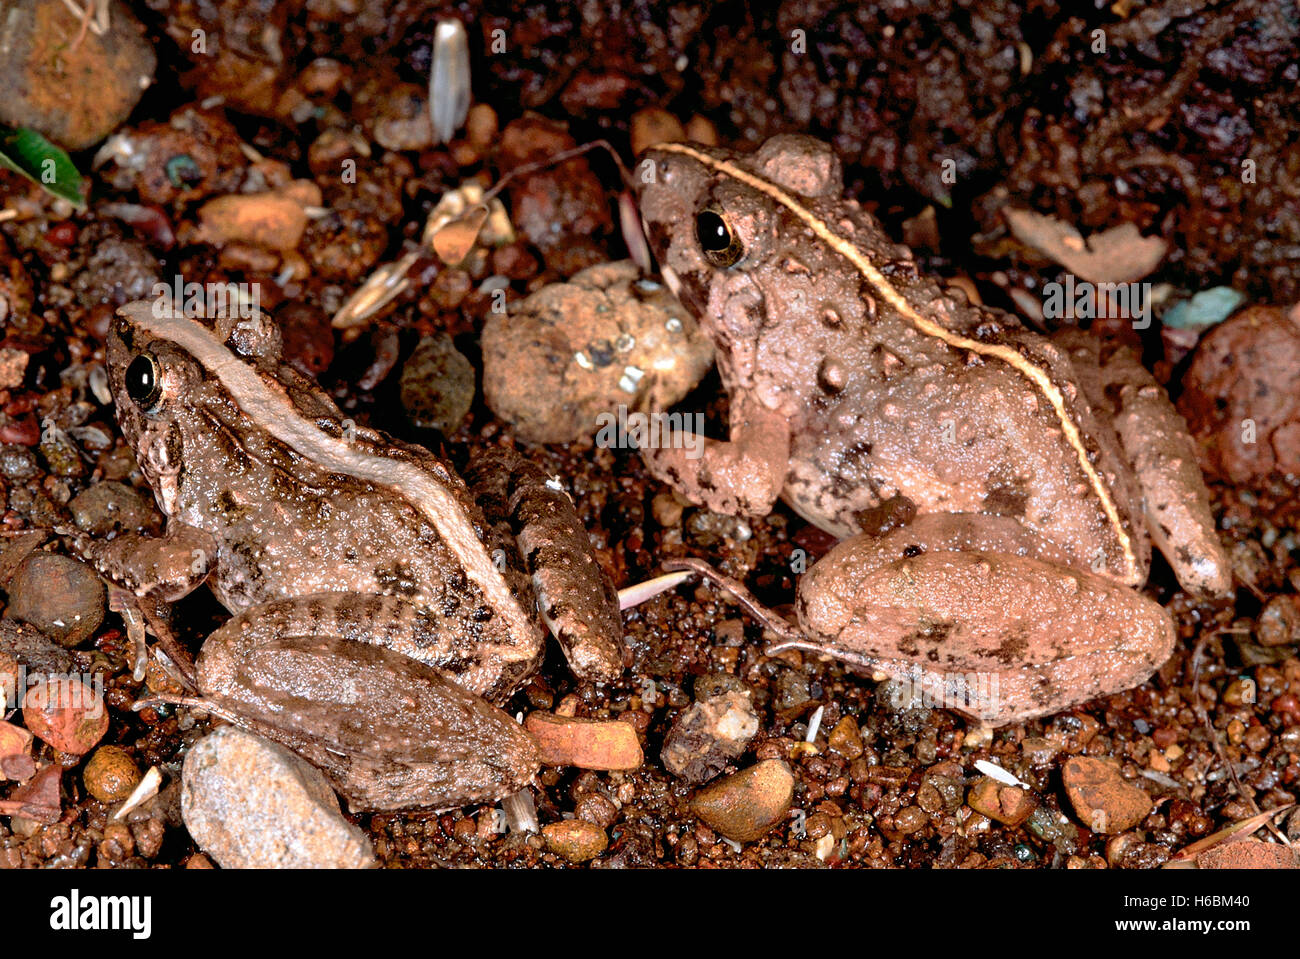 Rana Limnocharis group. Cricket frogs. Small frogs which have calls similar to that of crickets. Stock Photo